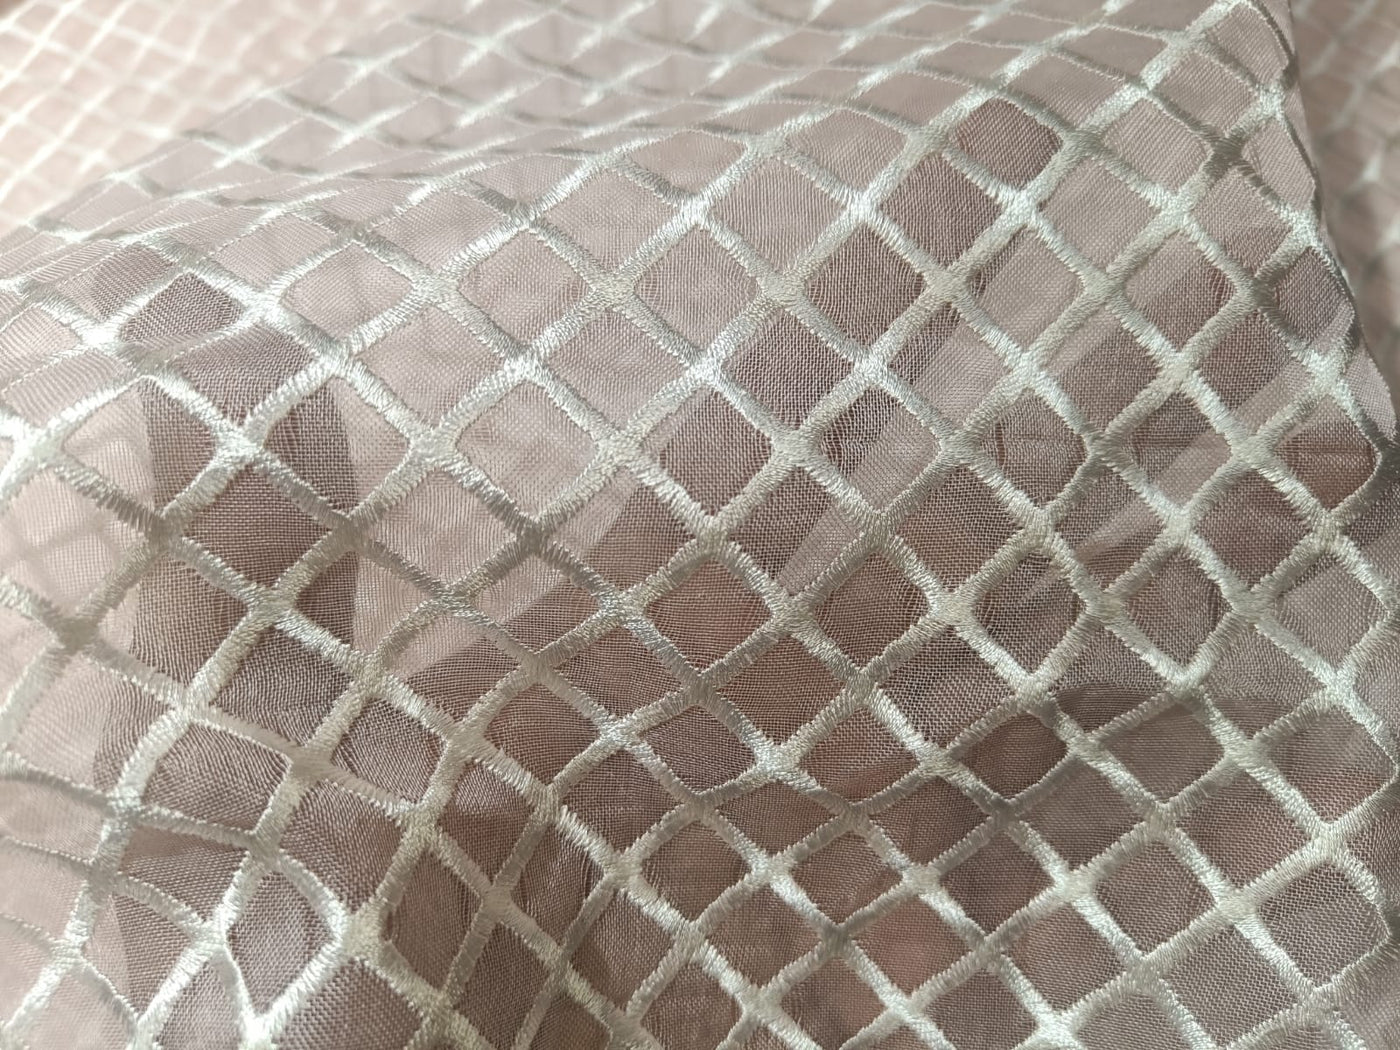 100 % Silk Organza Embroidery Plaid Semi Sheer Fabric 44" wide available in three colors [12306/12482/83]